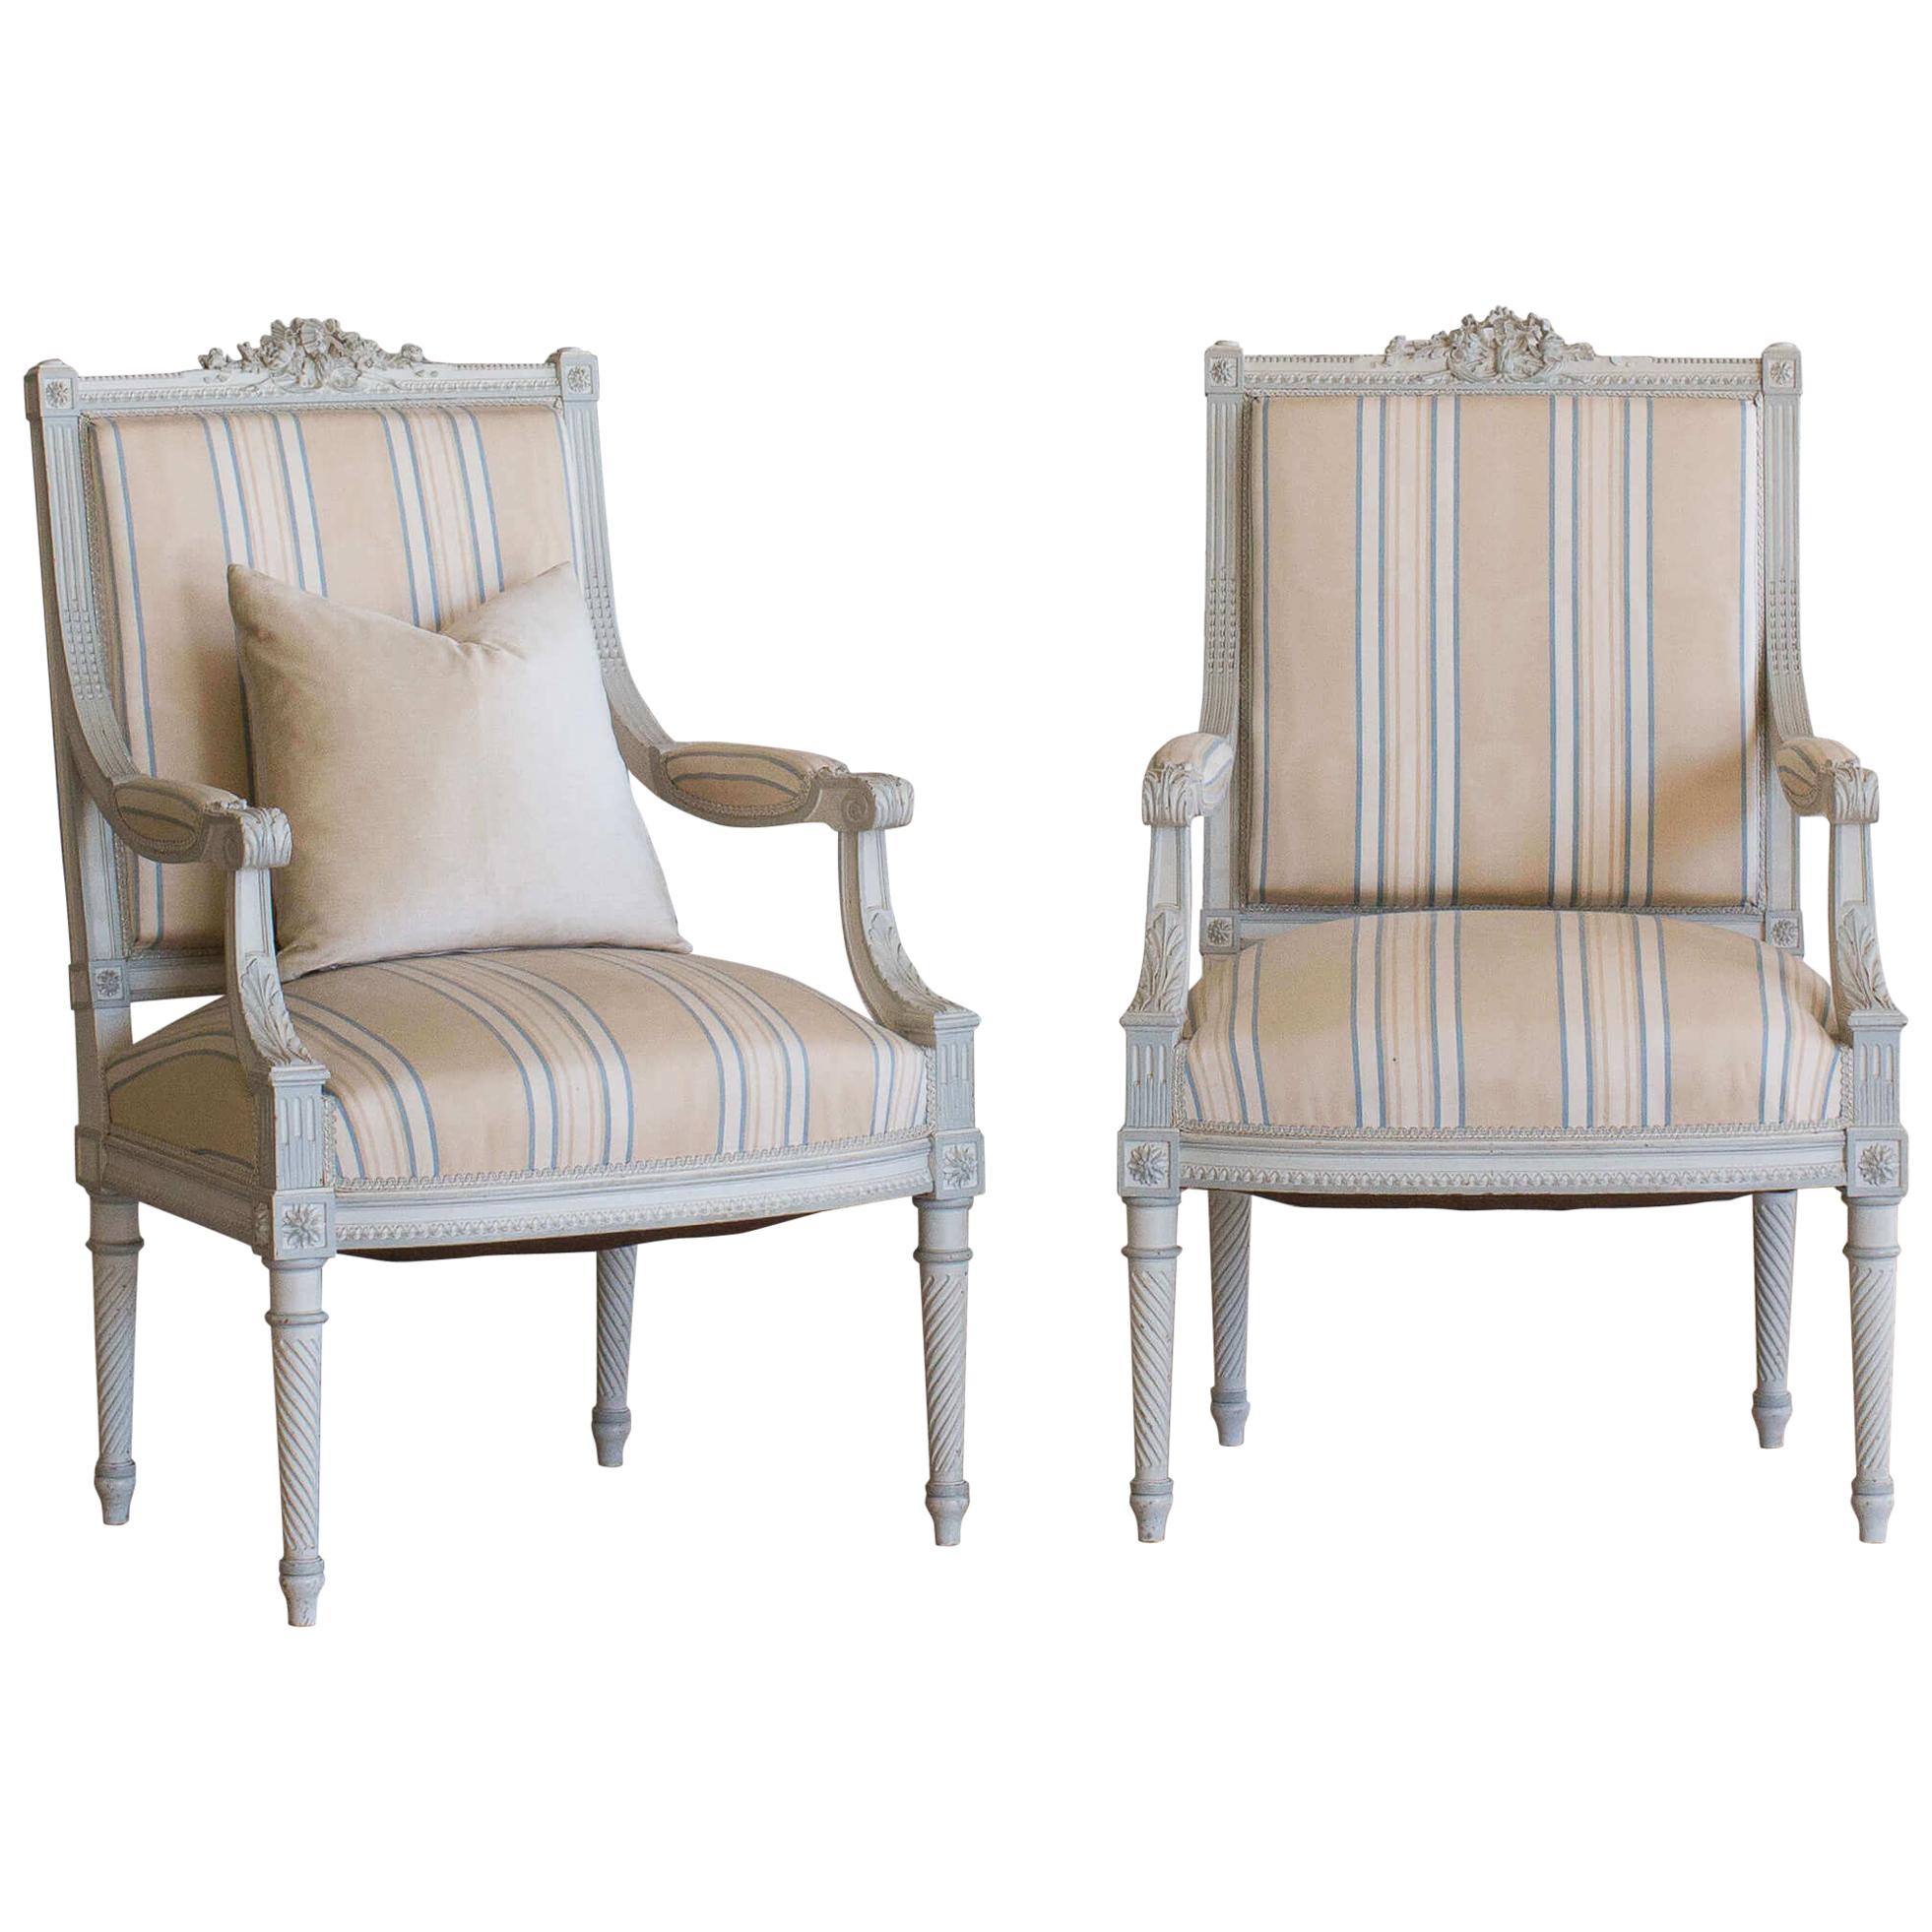 Antique Pair of Armchairs in Stripe Fabric For Sale